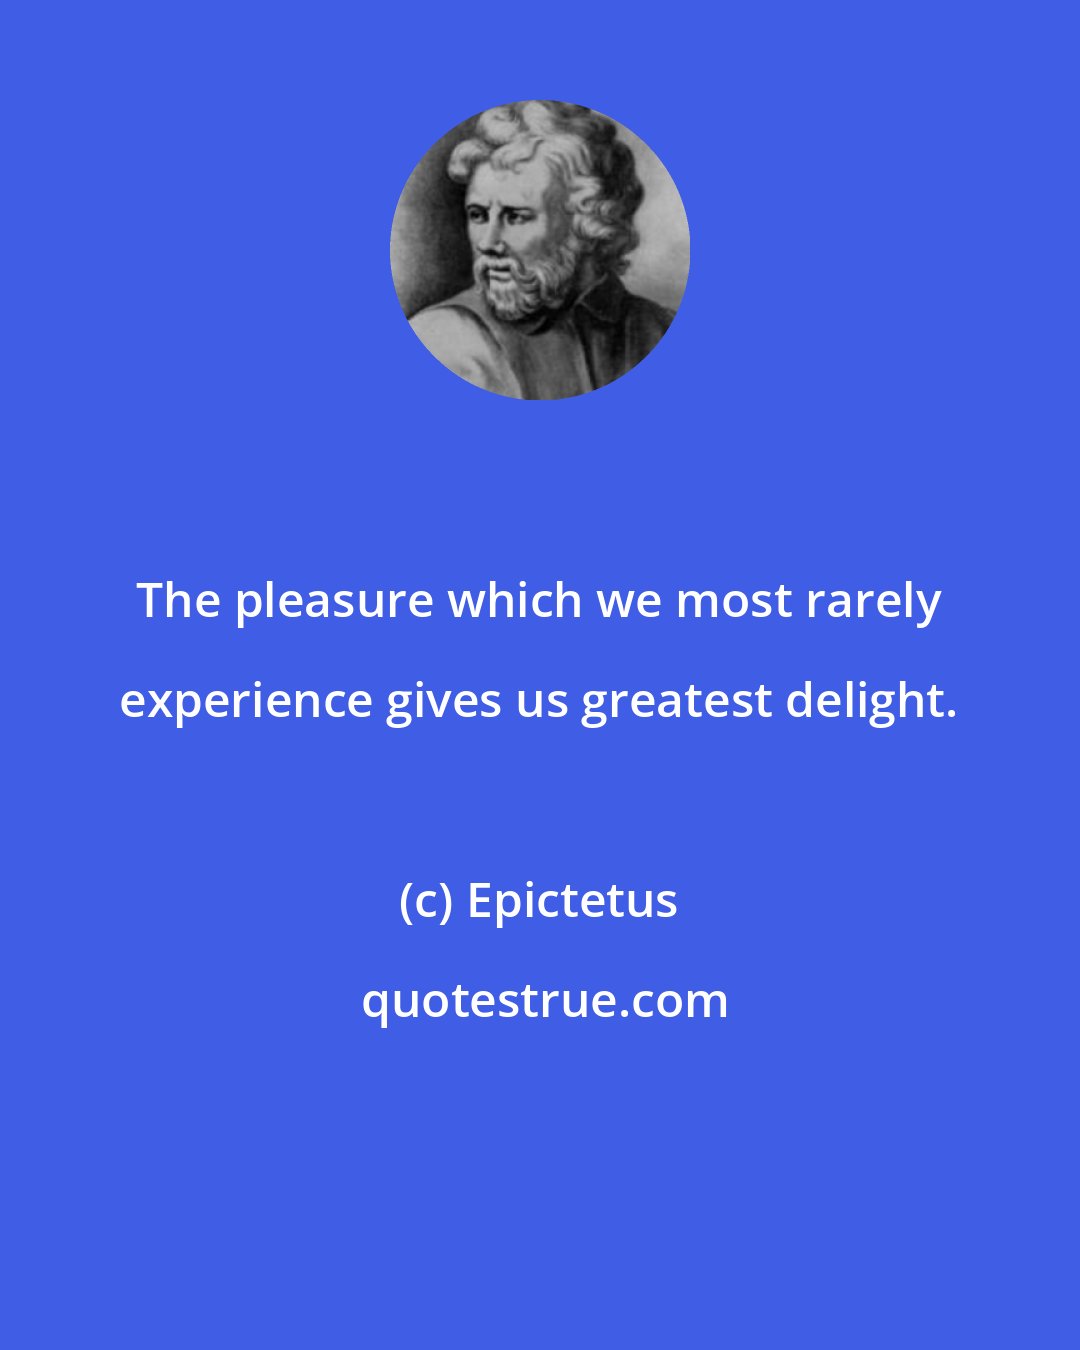 Epictetus: The pleasure which we most rarely experience gives us greatest delight.